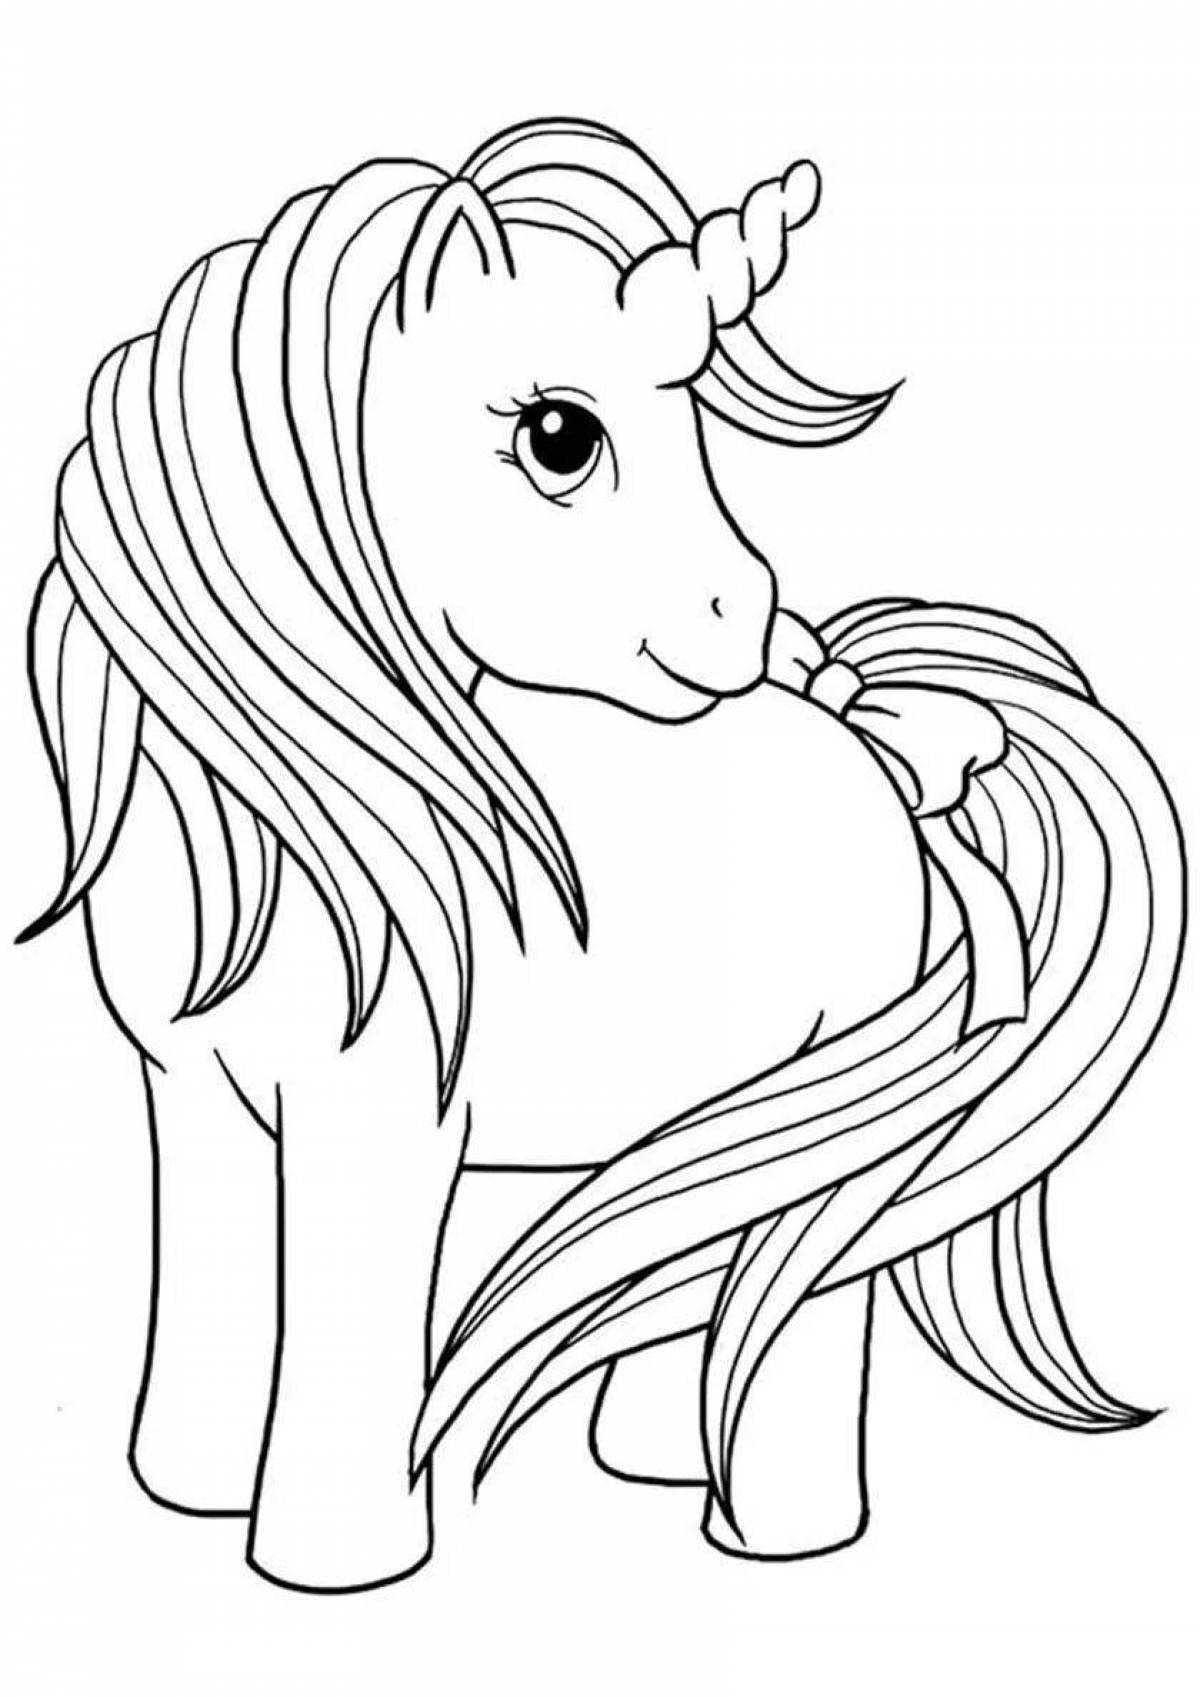 Coloring book for girls cute unicorns